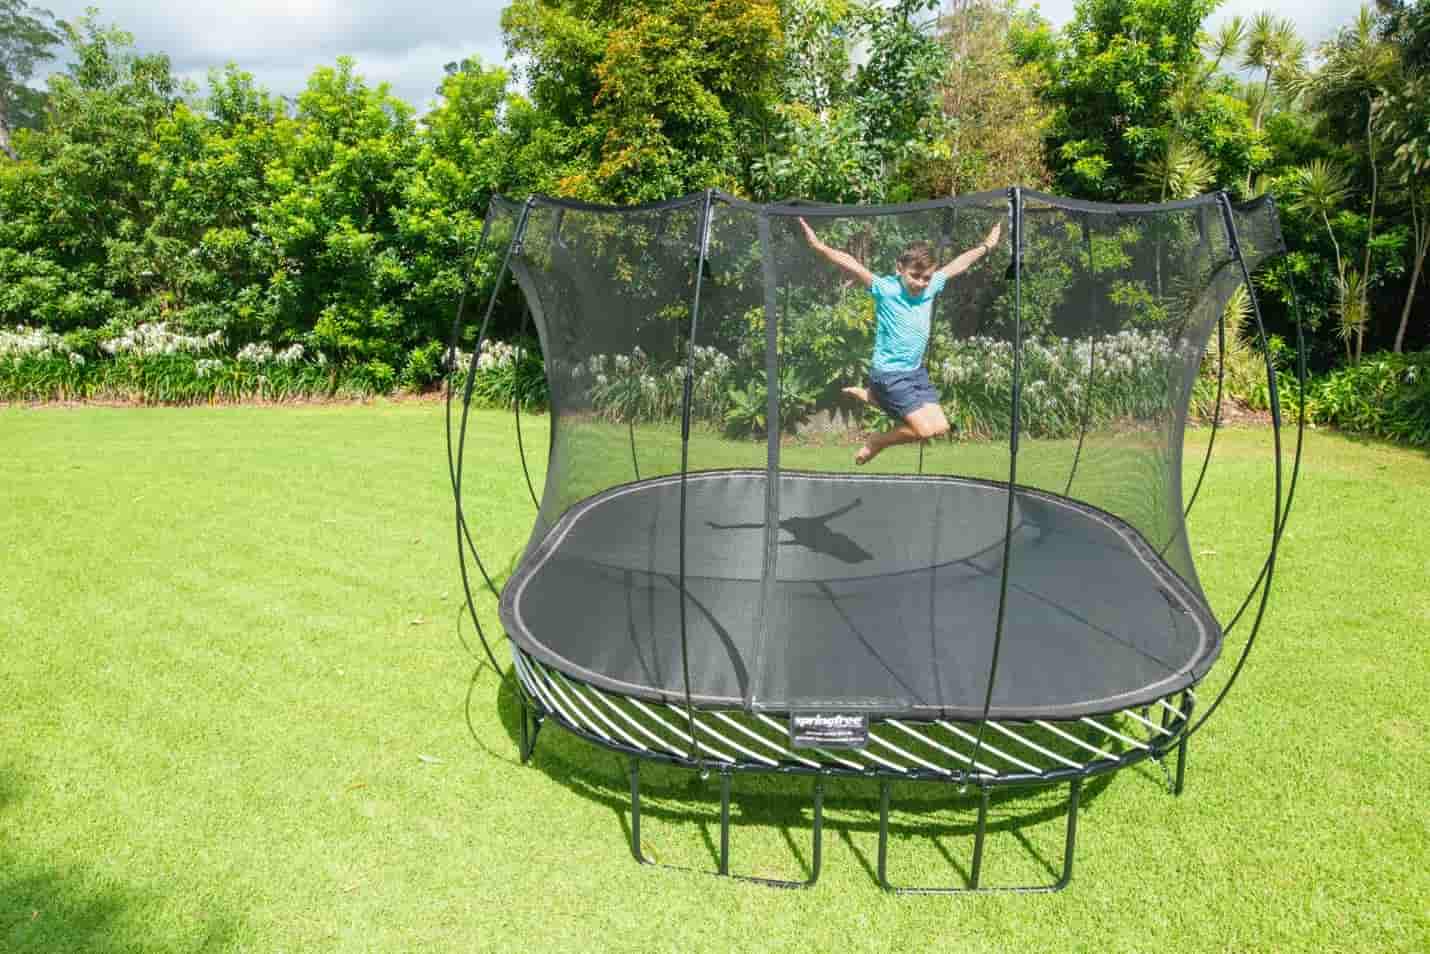 A boy jumping high in the air on a Springfree Trampoline.